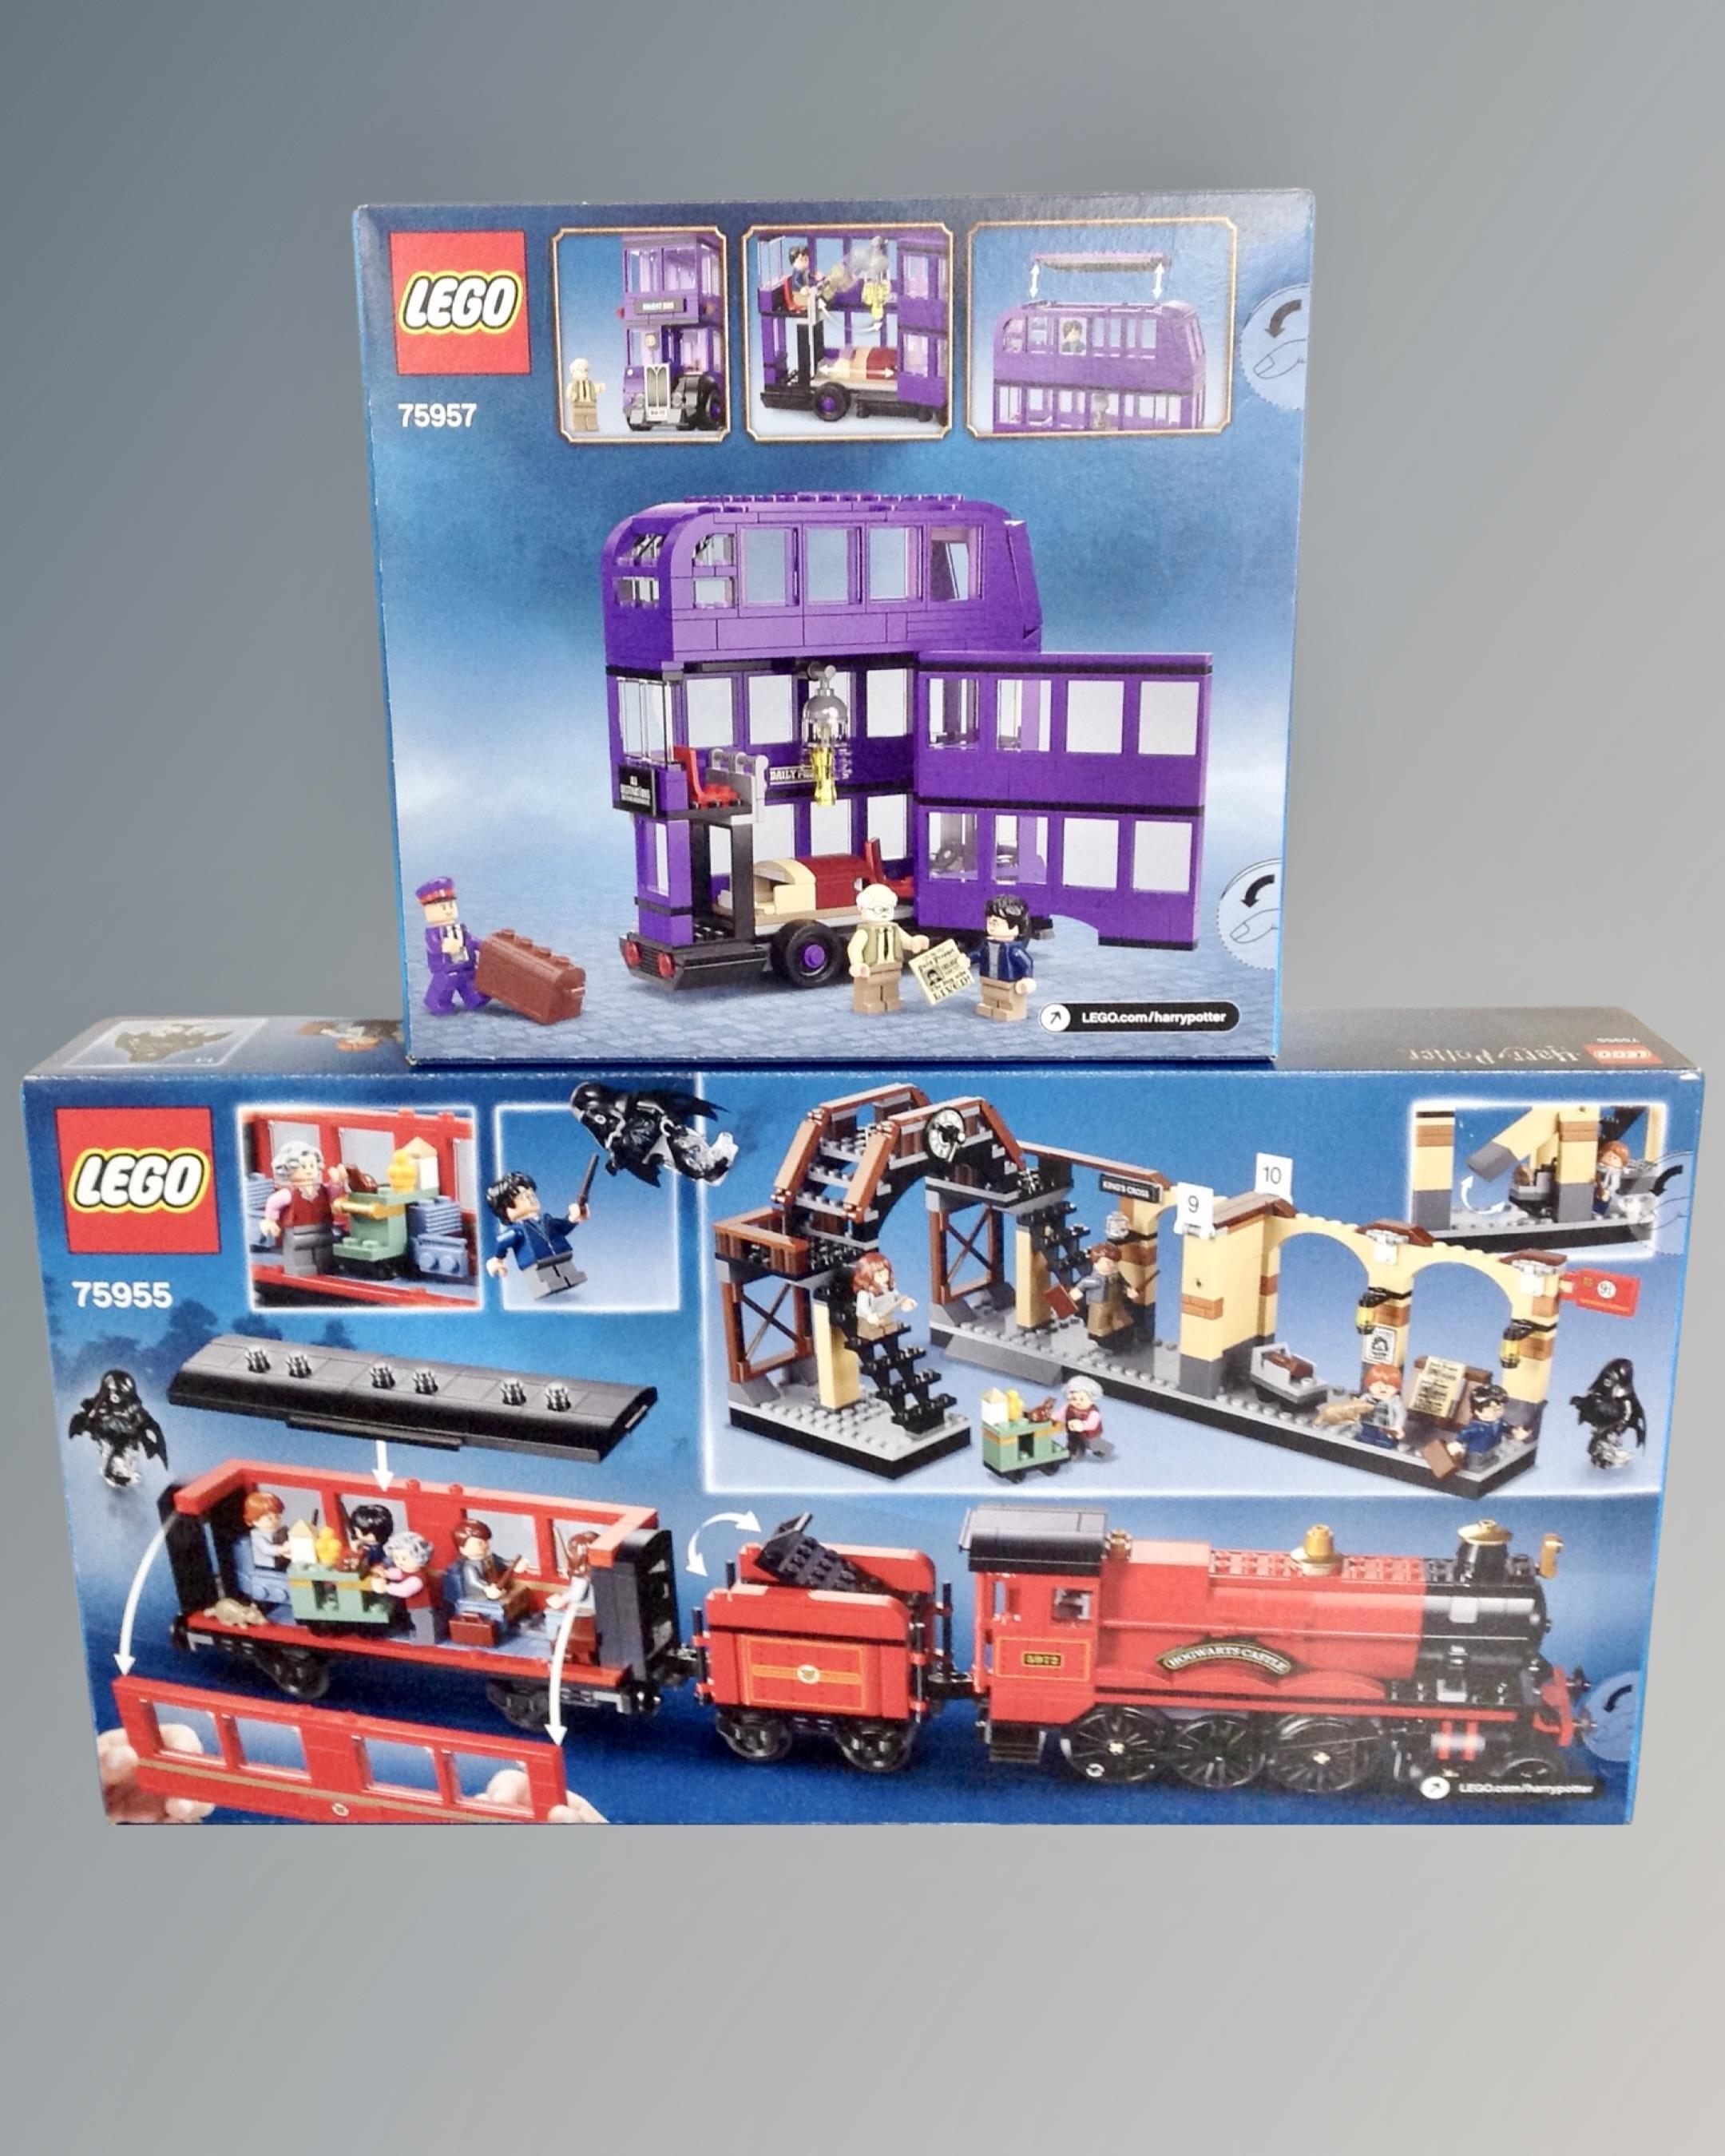 Lego : 75955 Harry Potter Hogwarts Express, together with Lego : 75957 Harry Potter The Knight Bus, - Image 2 of 4